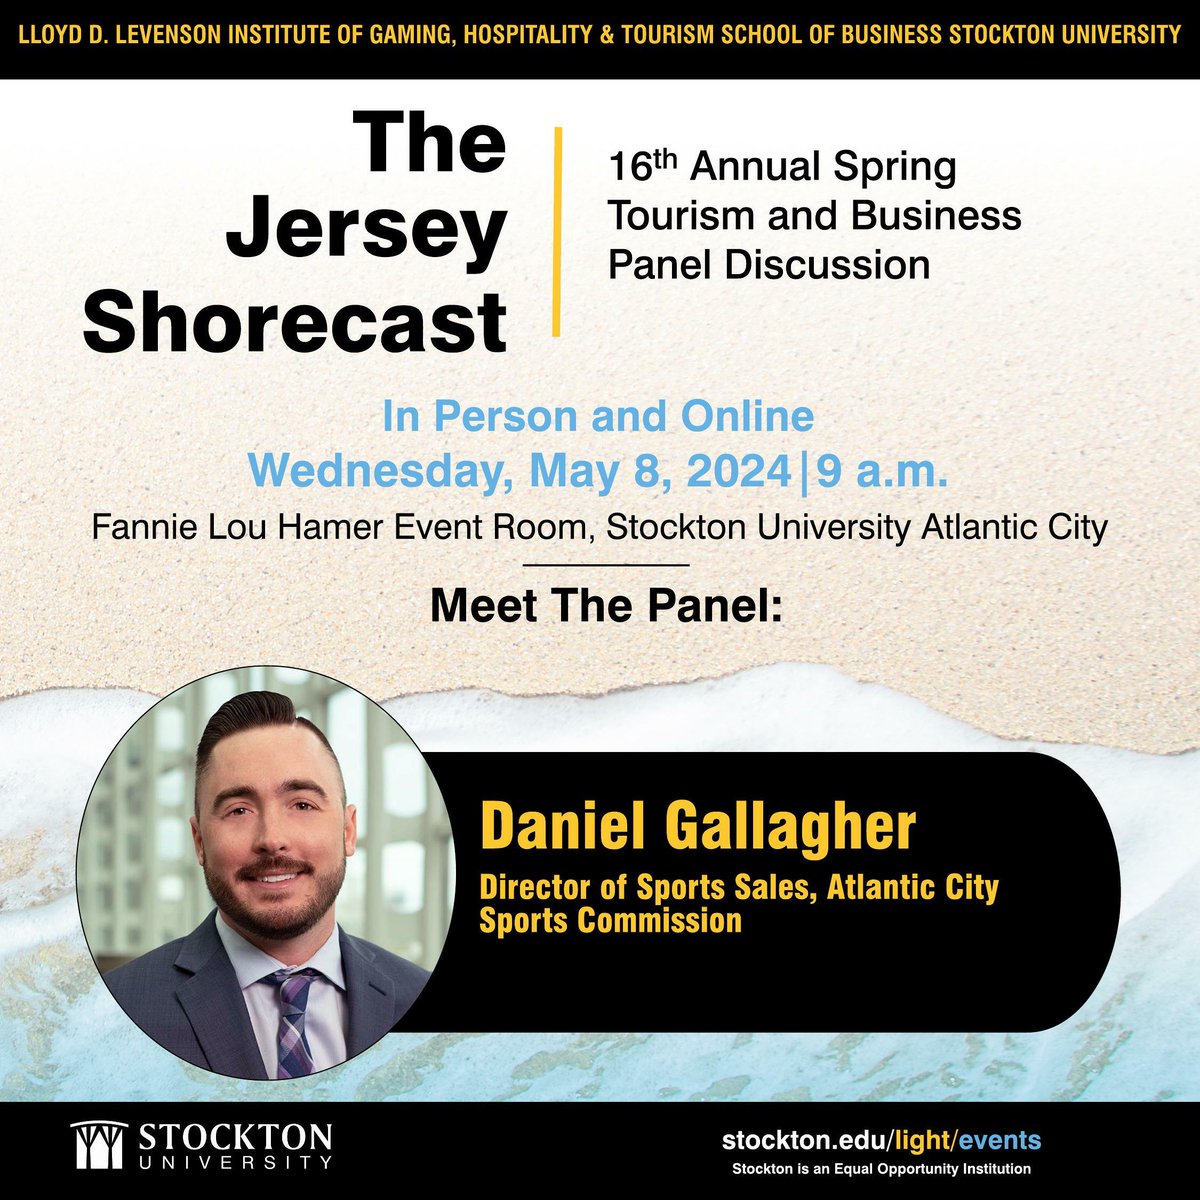 Join Daniel Gallagher and a panel of experts for a discussion of New Jersey tourism and predictions for the Summer 2024 season. eventbrite.com/e/16th-annual-…… #summer2024 #tourism #newjersey #atlanticcity #Shorecast2024 @Stockton_edu @Stockton_BUSN